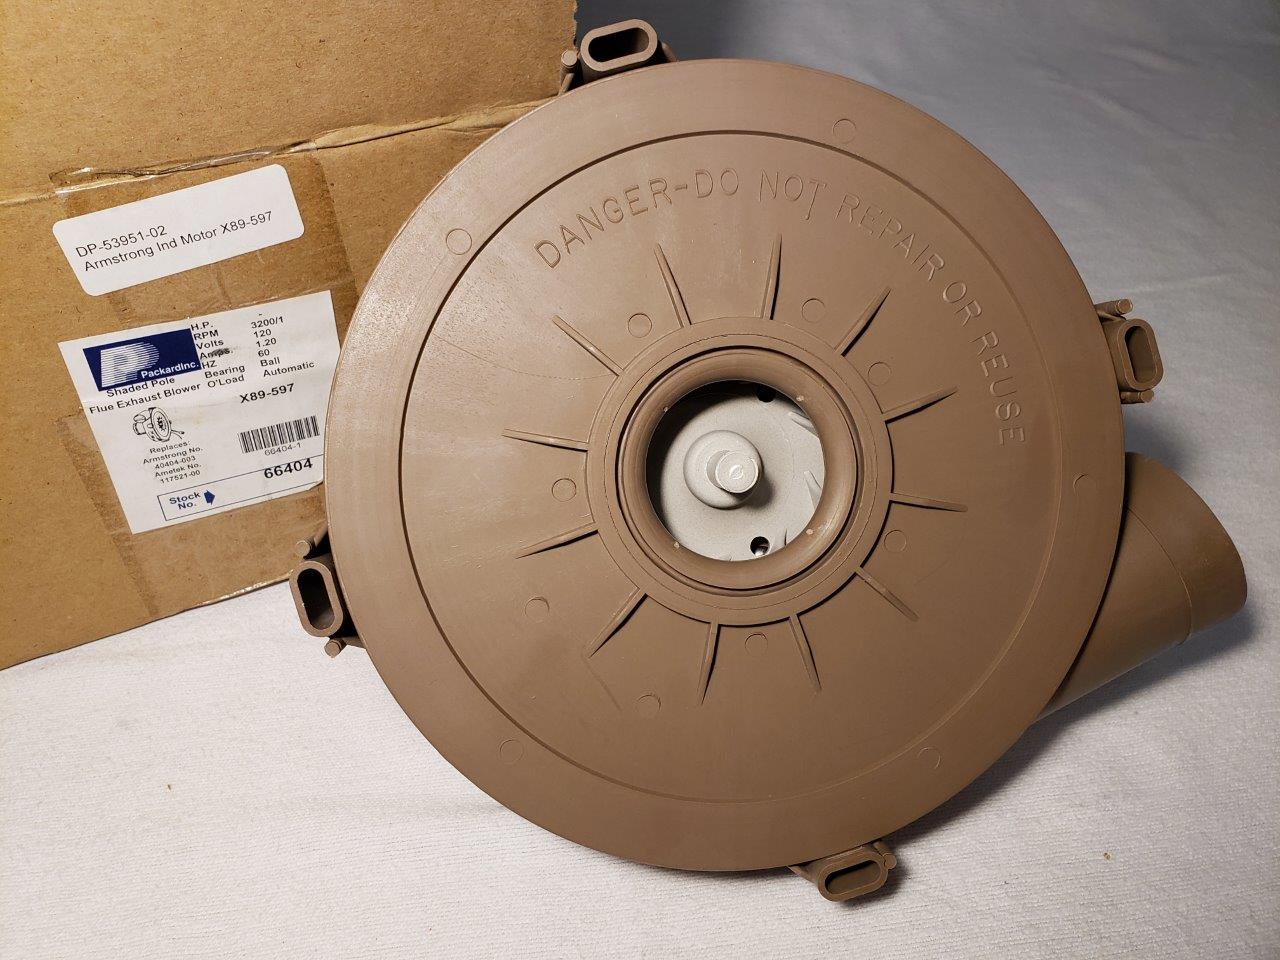 Packard 66404 1/30 HP Draft Inducer Johnstone X89-597 for Armstrong 40404-003 40404003